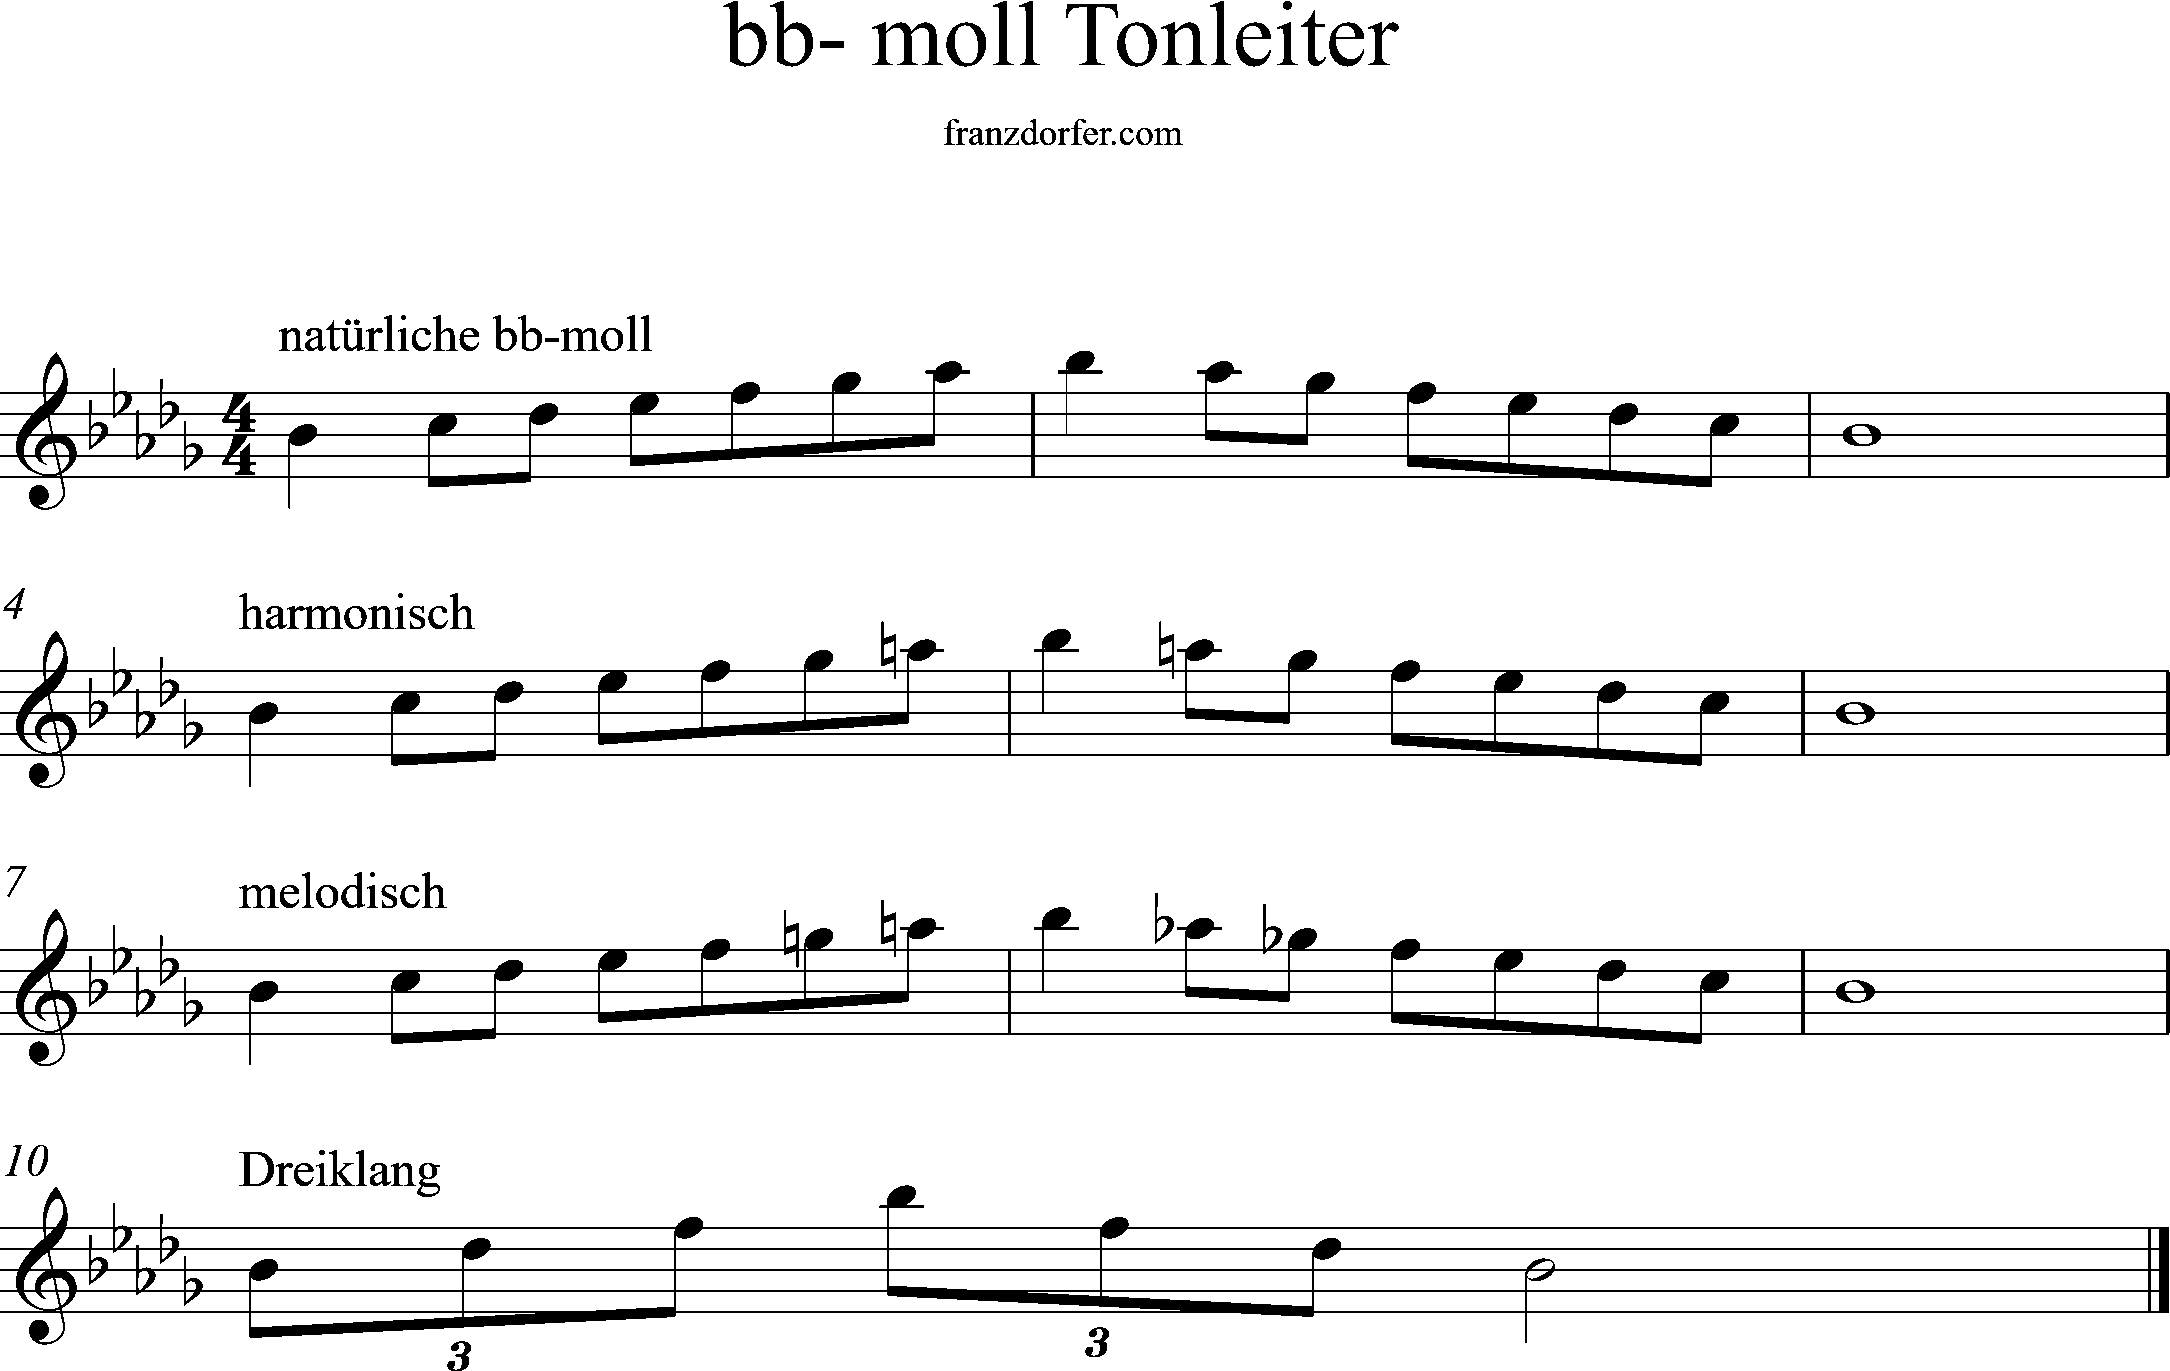 bb-minor scale, treble clef, middle octave